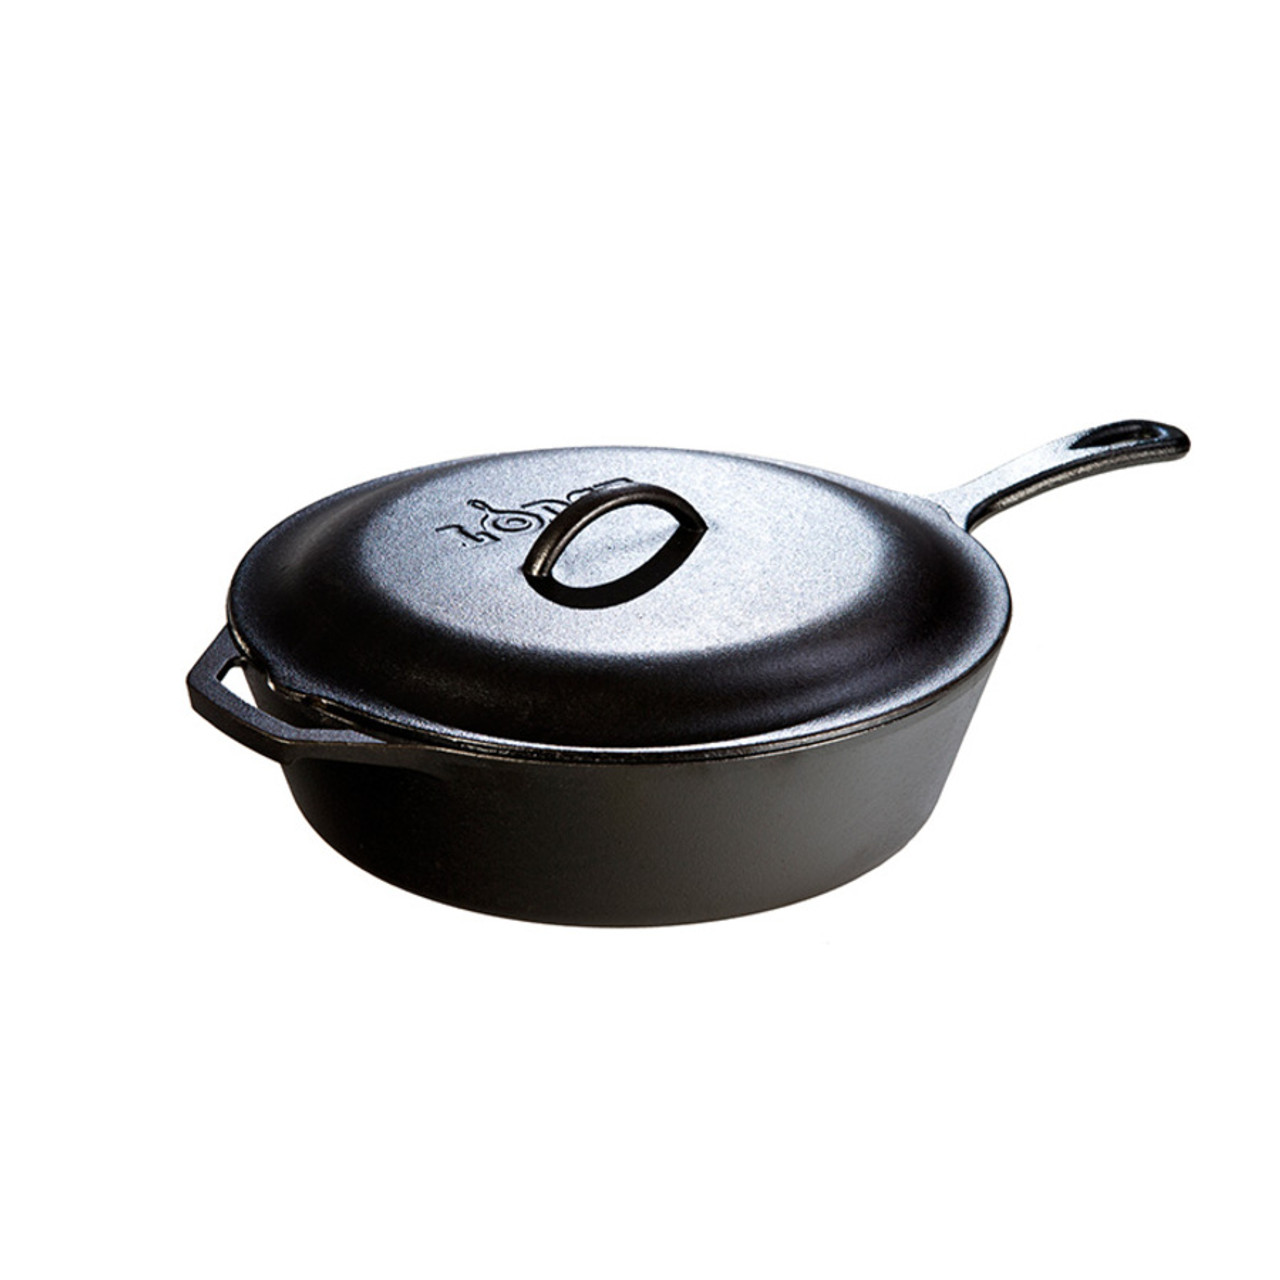 Cast Iron Skillet Lid - 12 Inch